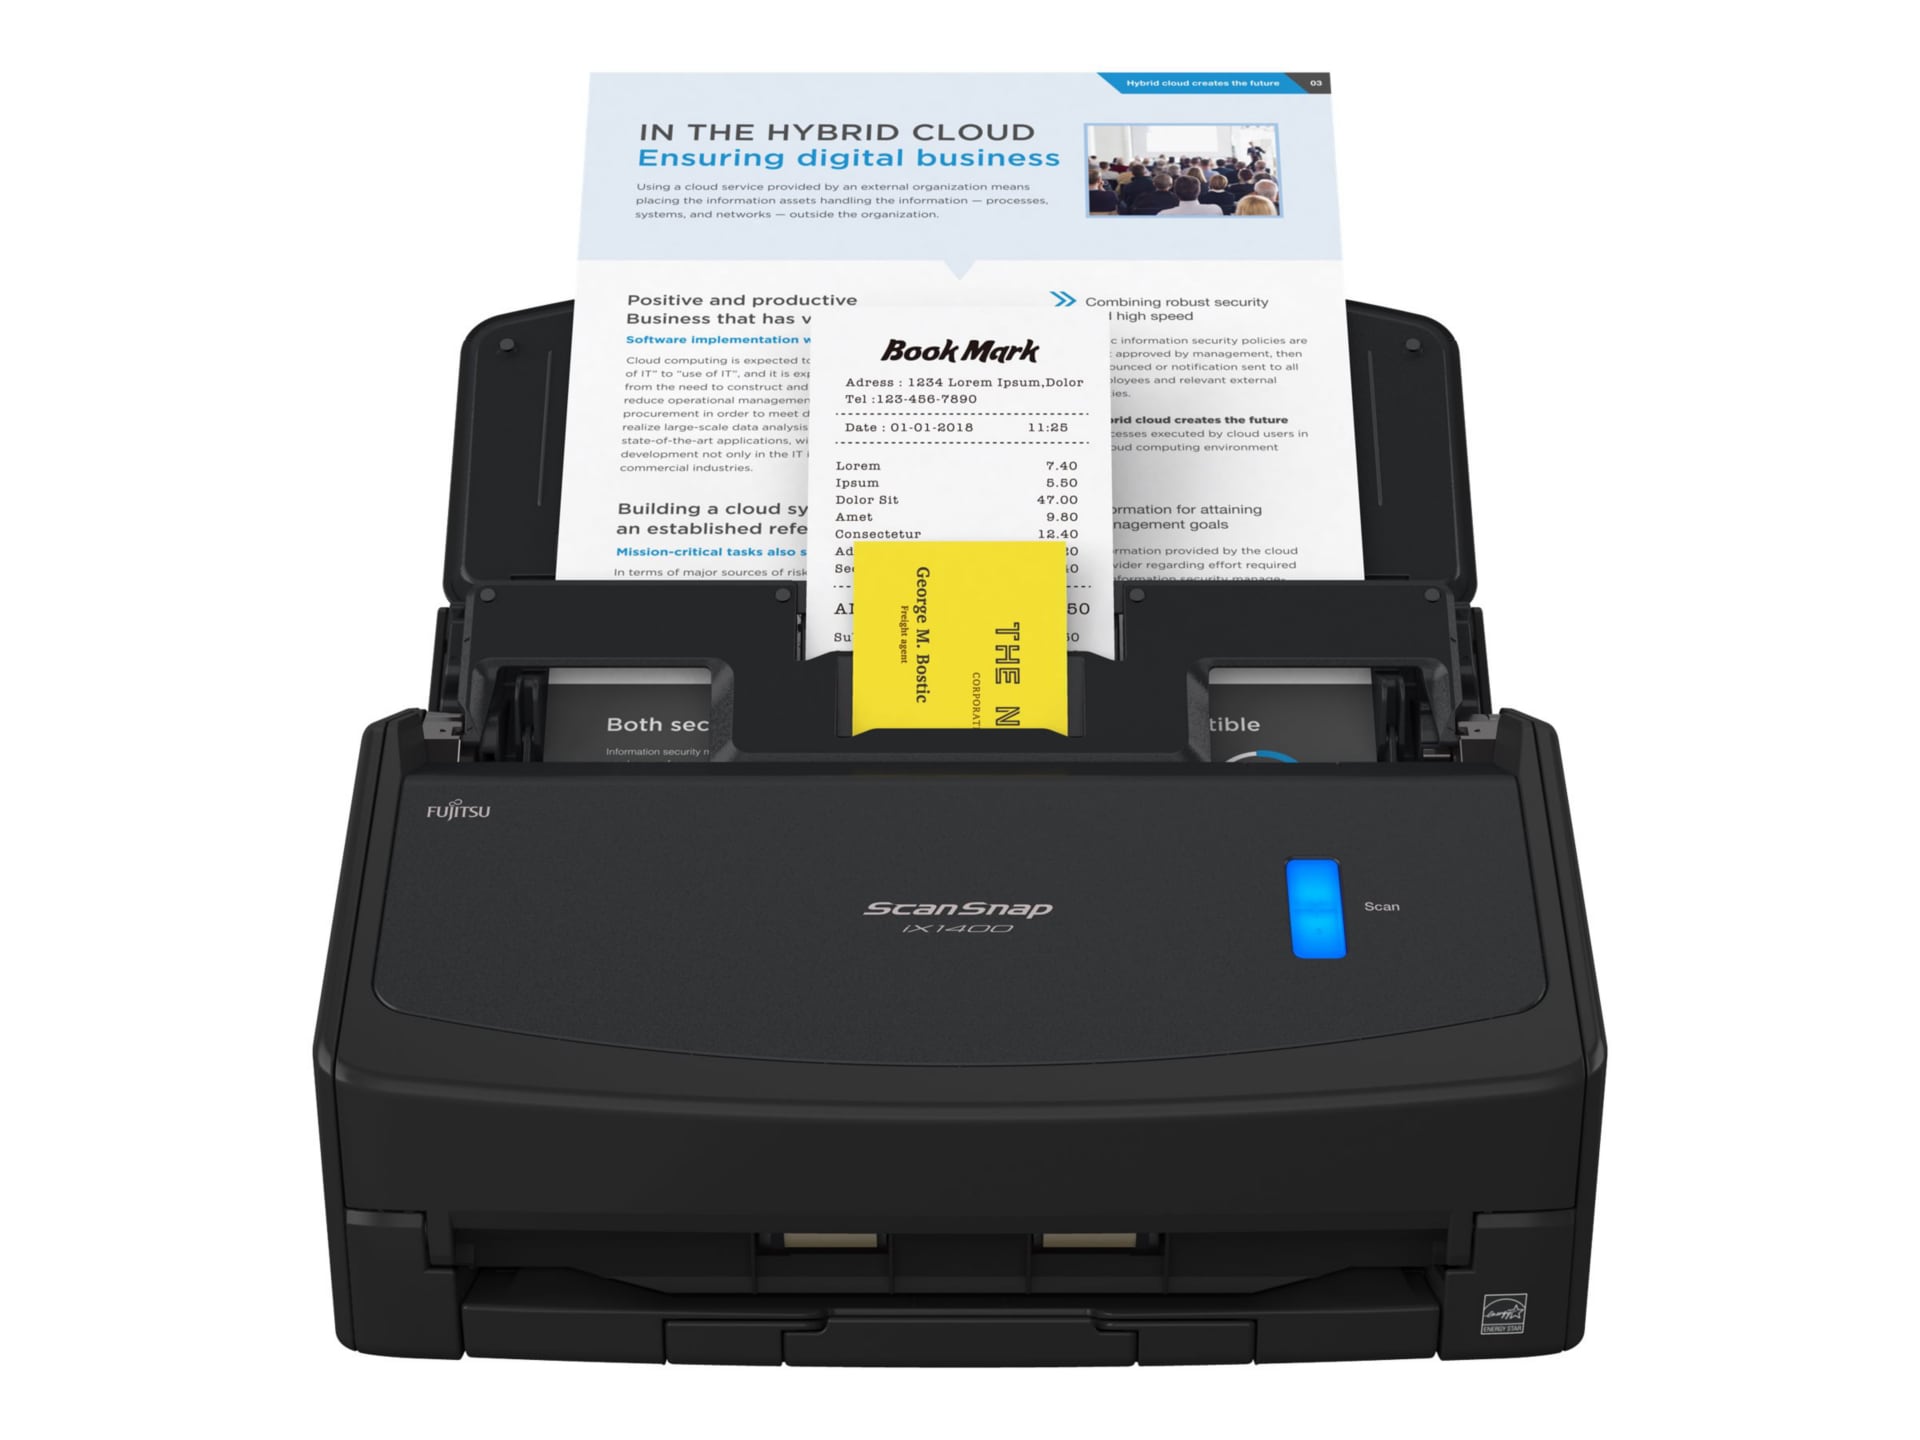 Epson DS-320 - document scanner - portable - USB 3.0 - B11B243201 -  Document Scanners 